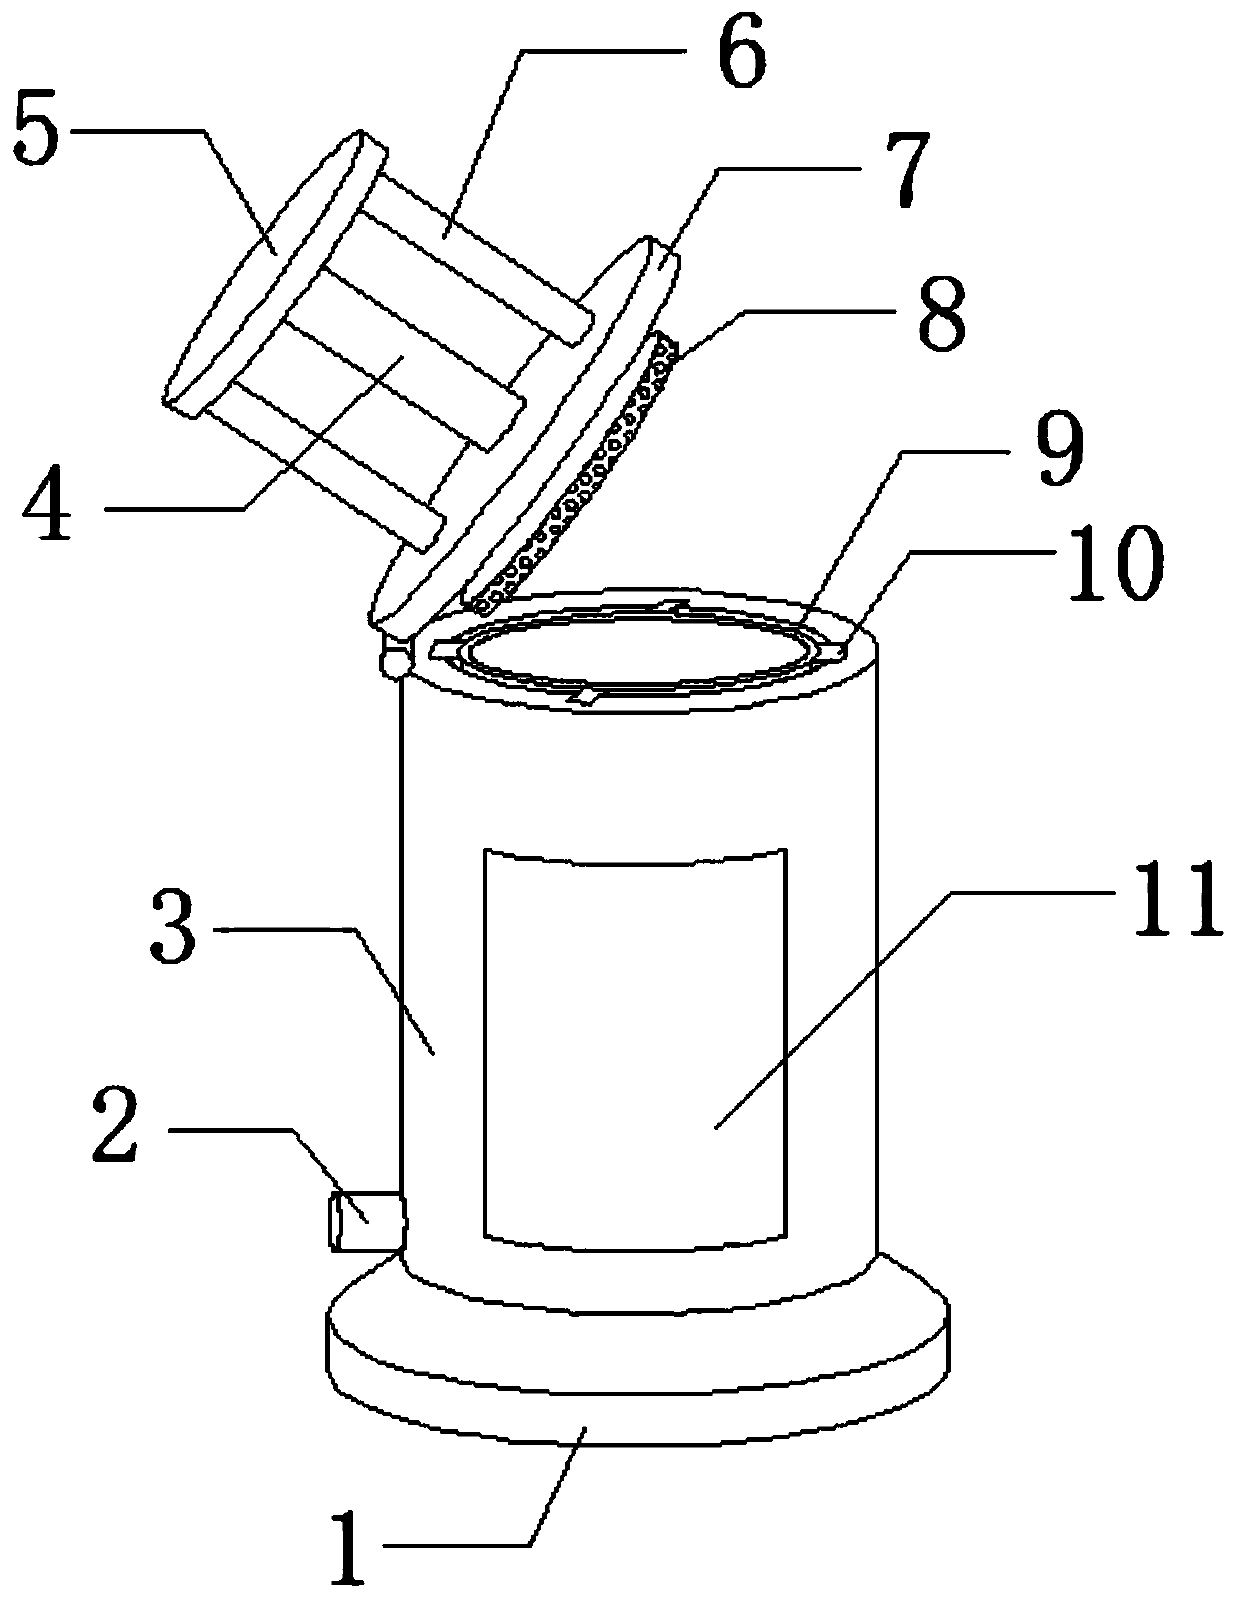 Juice squeezing device for agricultural product processing